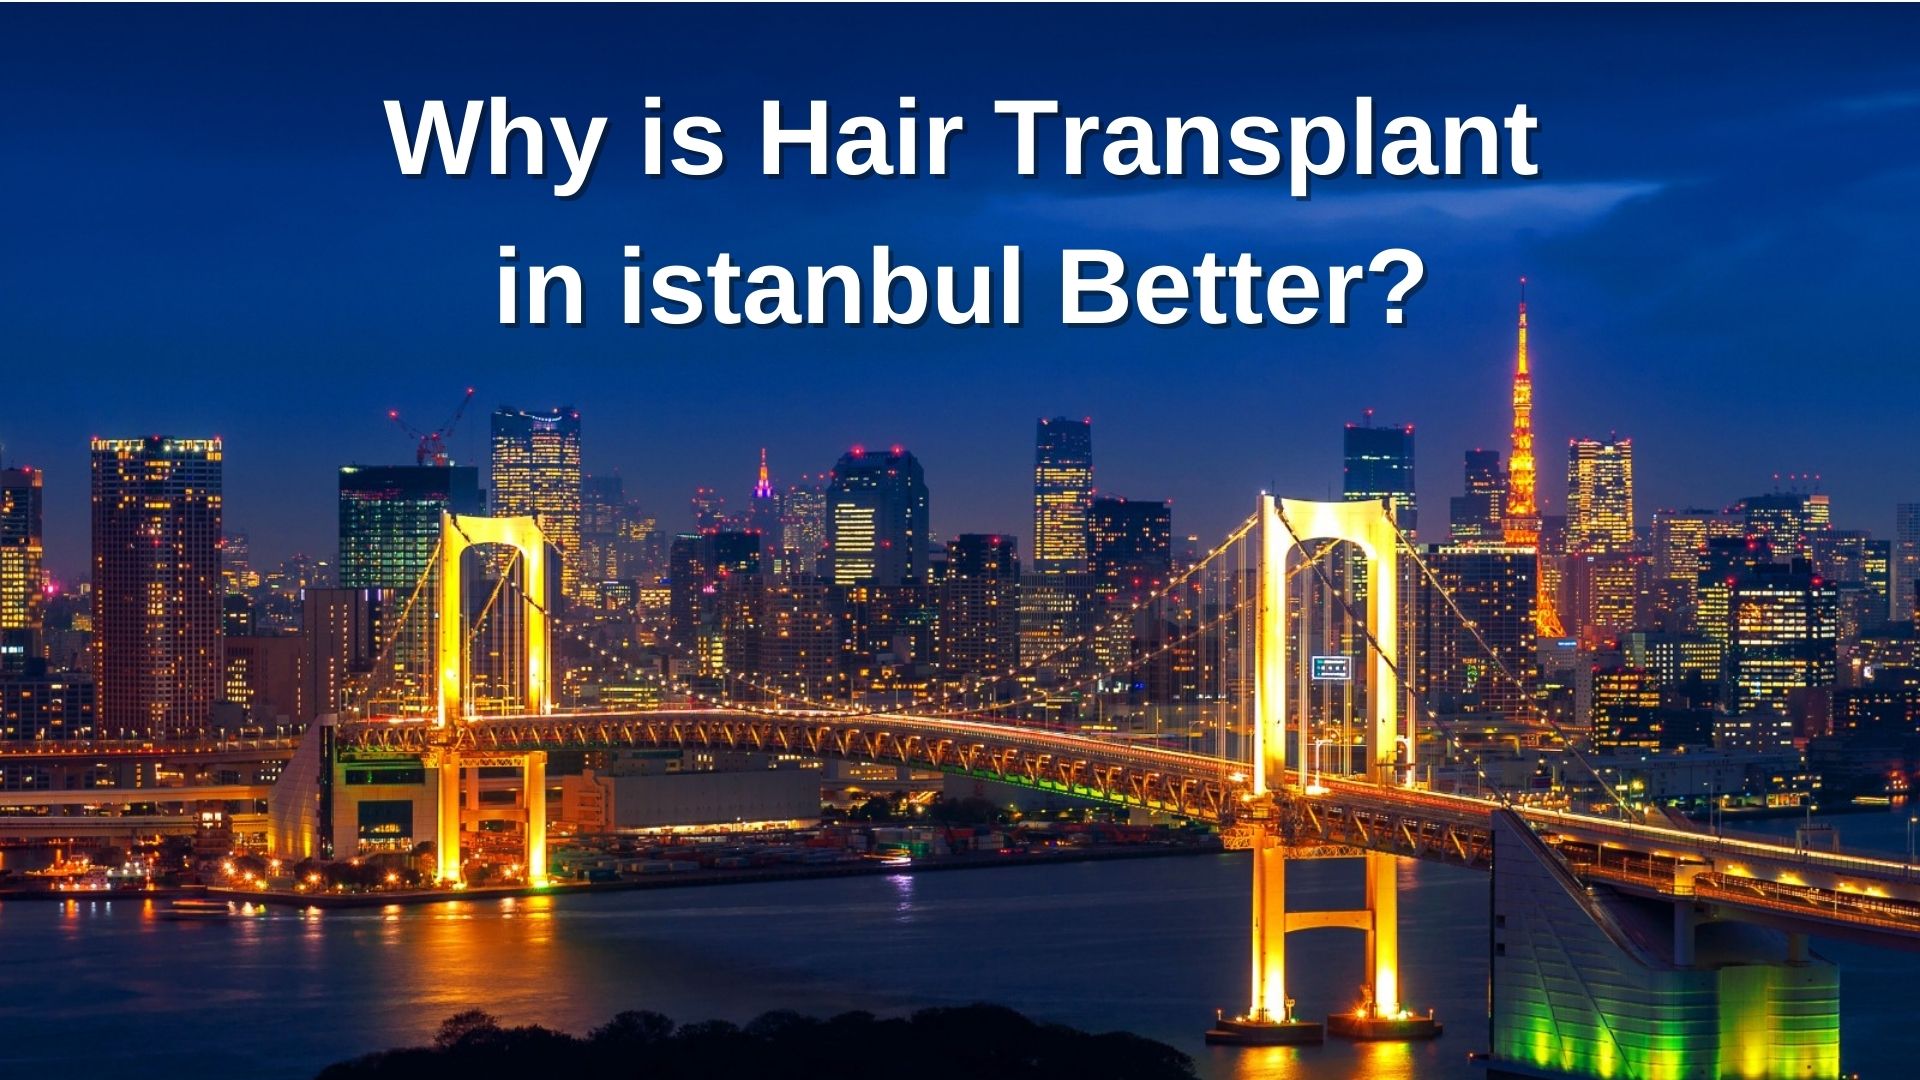 Why is Hair Transplant in istanbul Better?